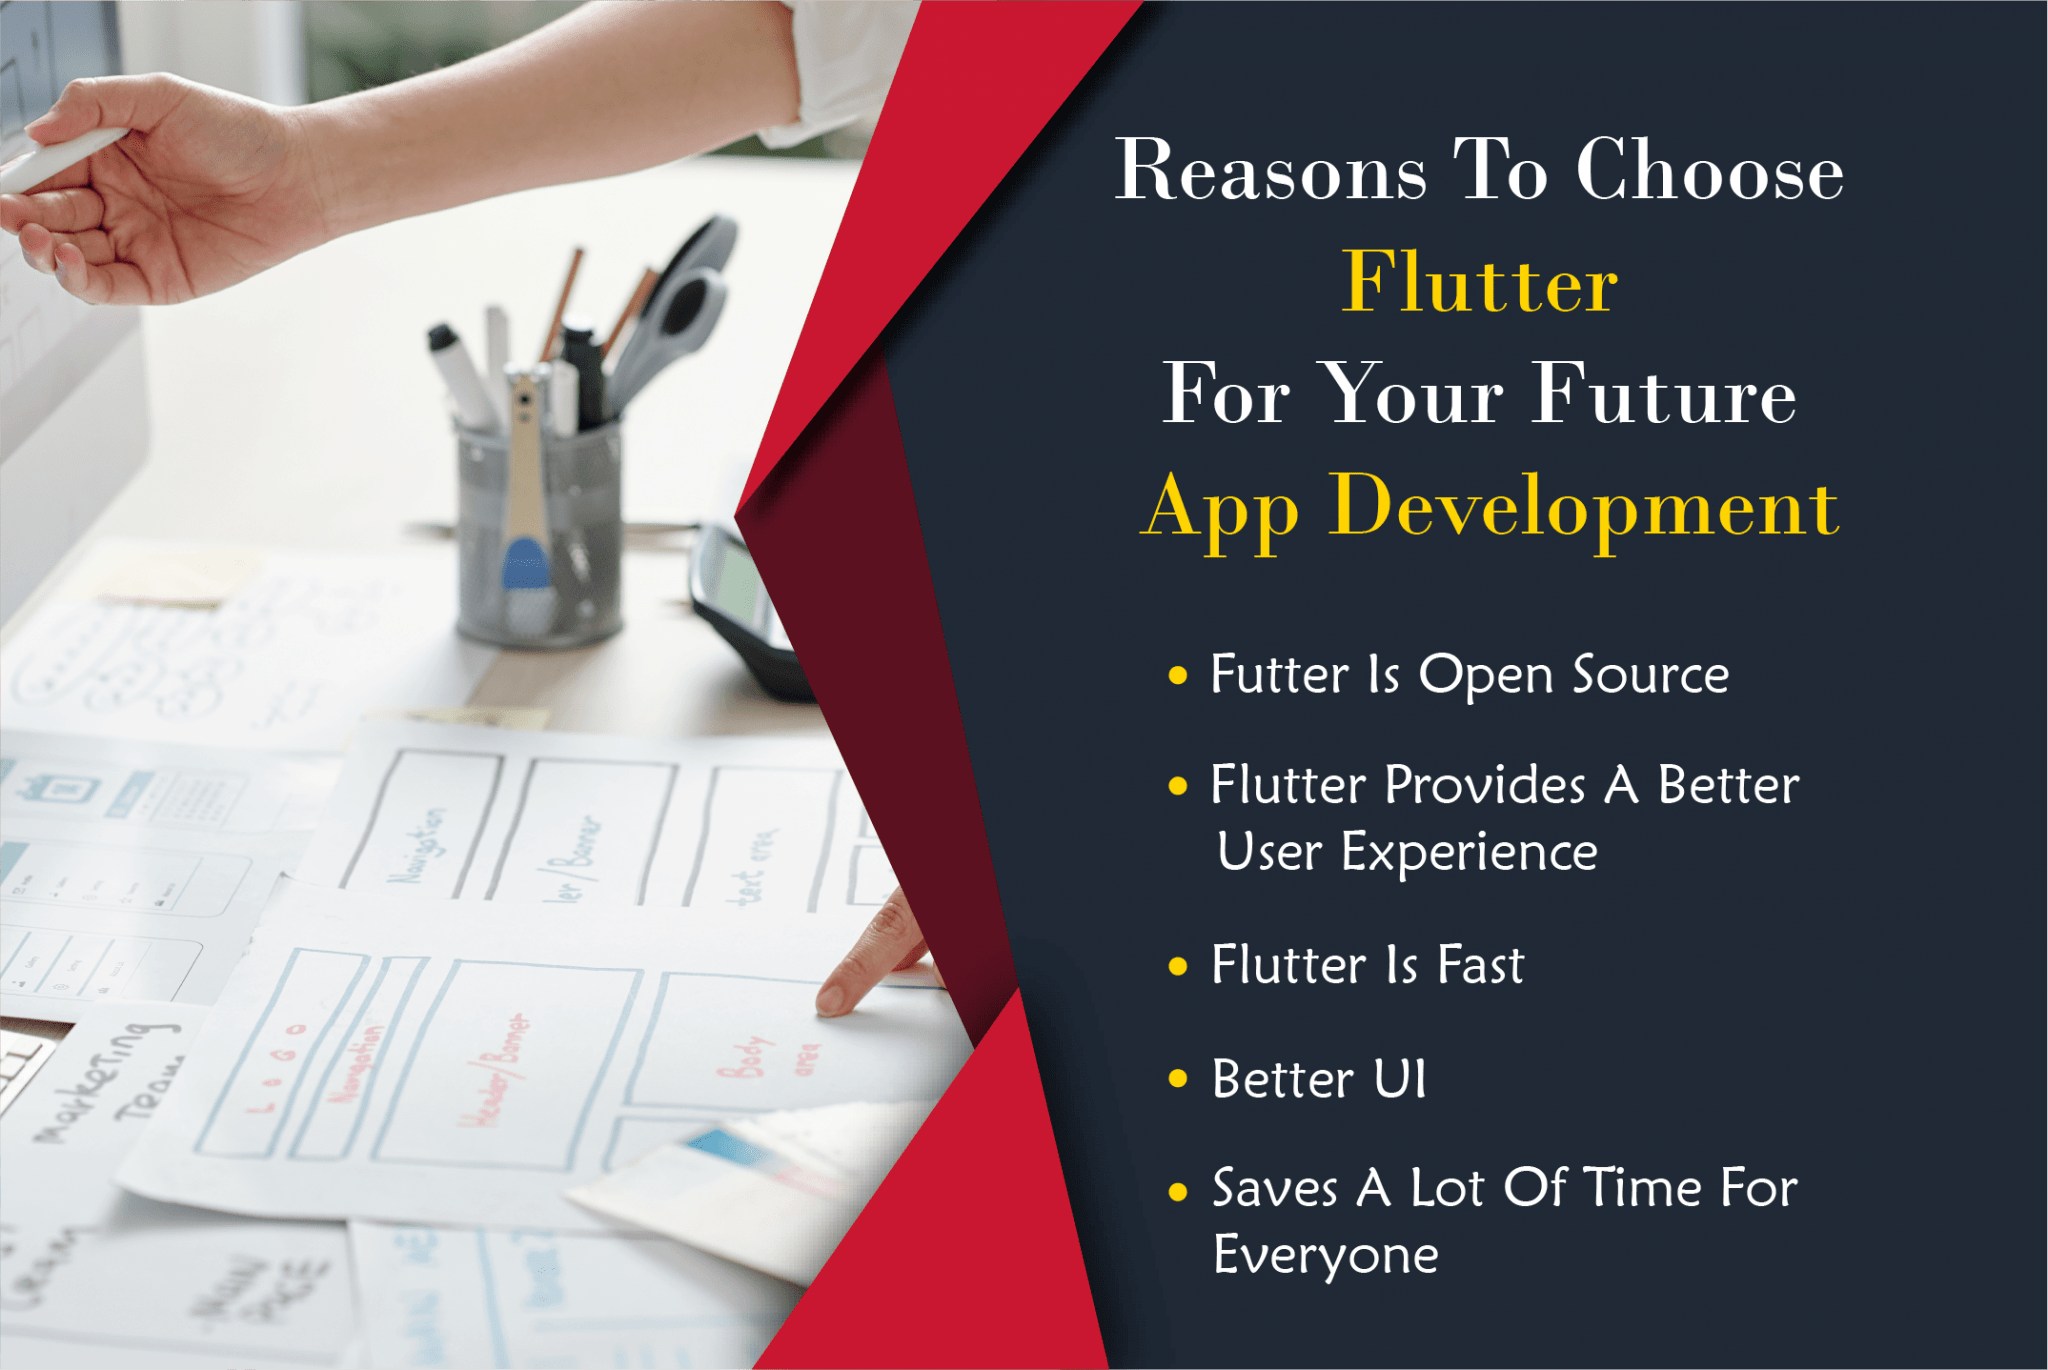 Reasons to choose Flutter for your future App development